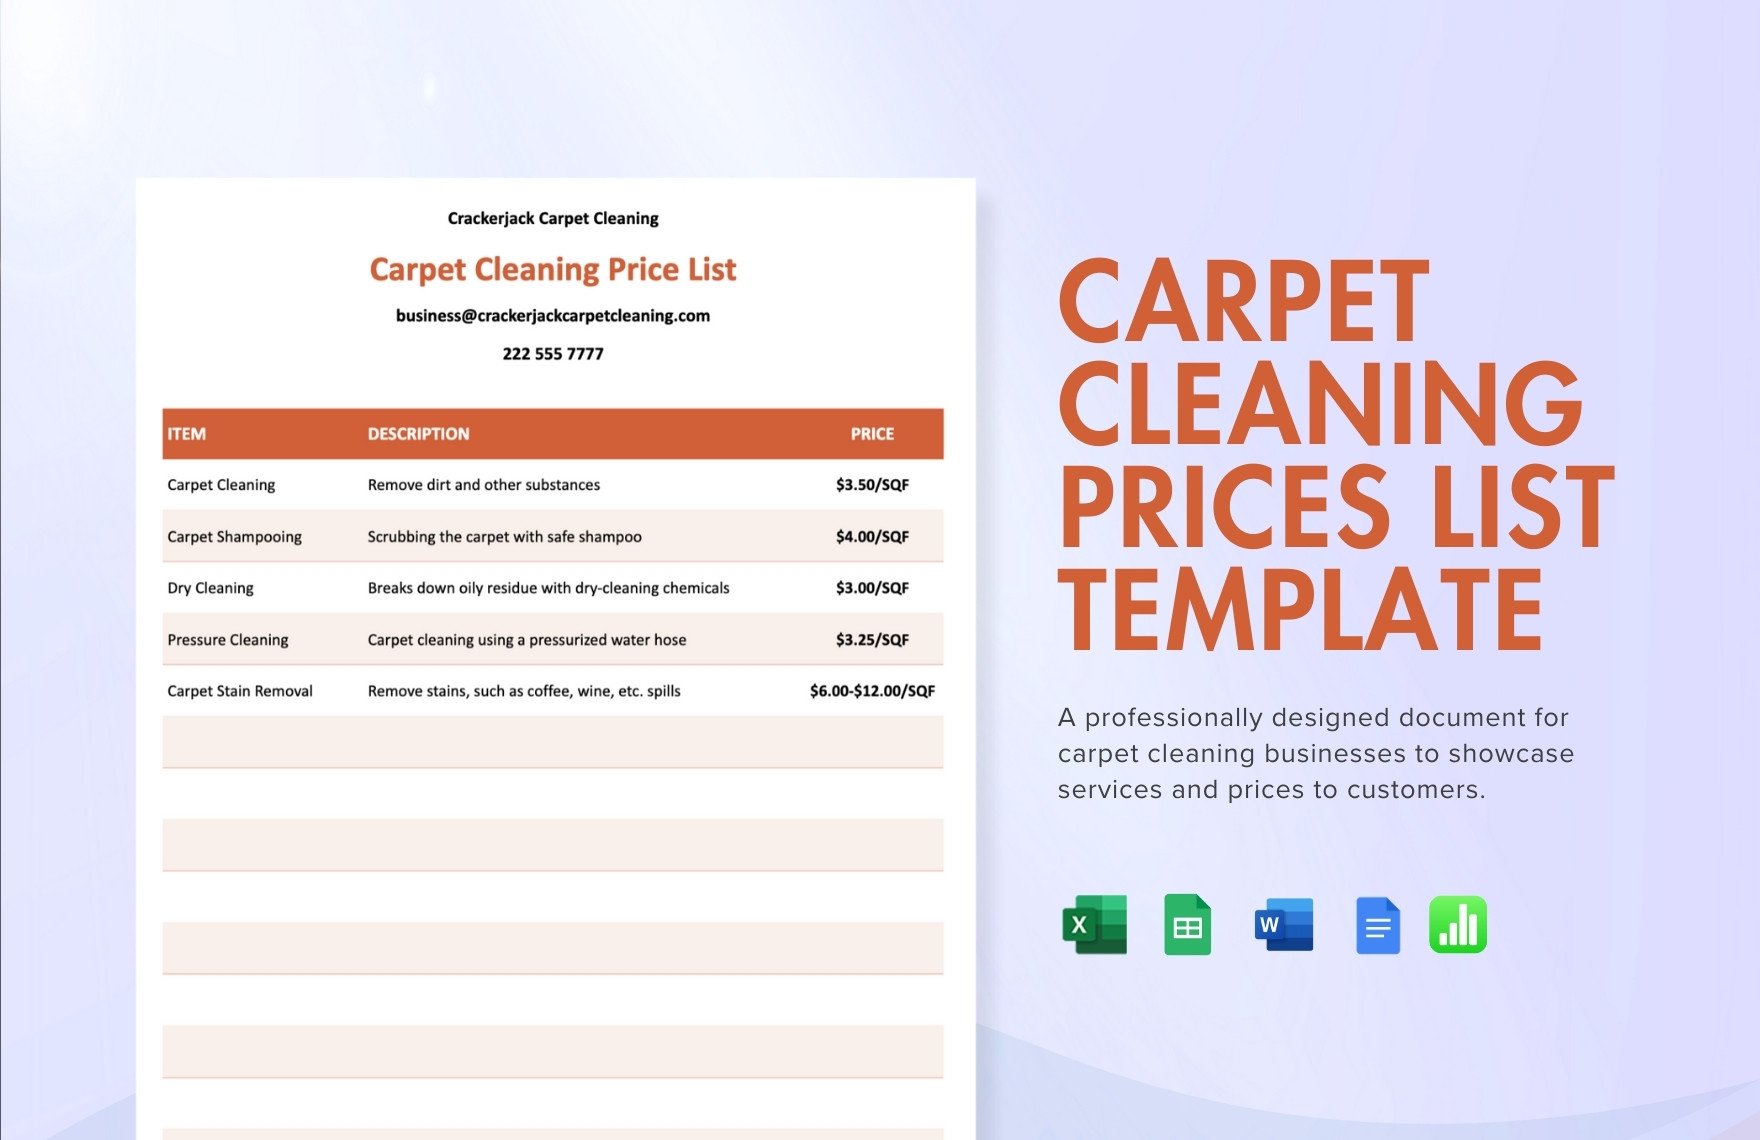 Carpet Cleaning Prices List Template in Word, Google Docs, Excel, Google Sheets, Apple Numbers